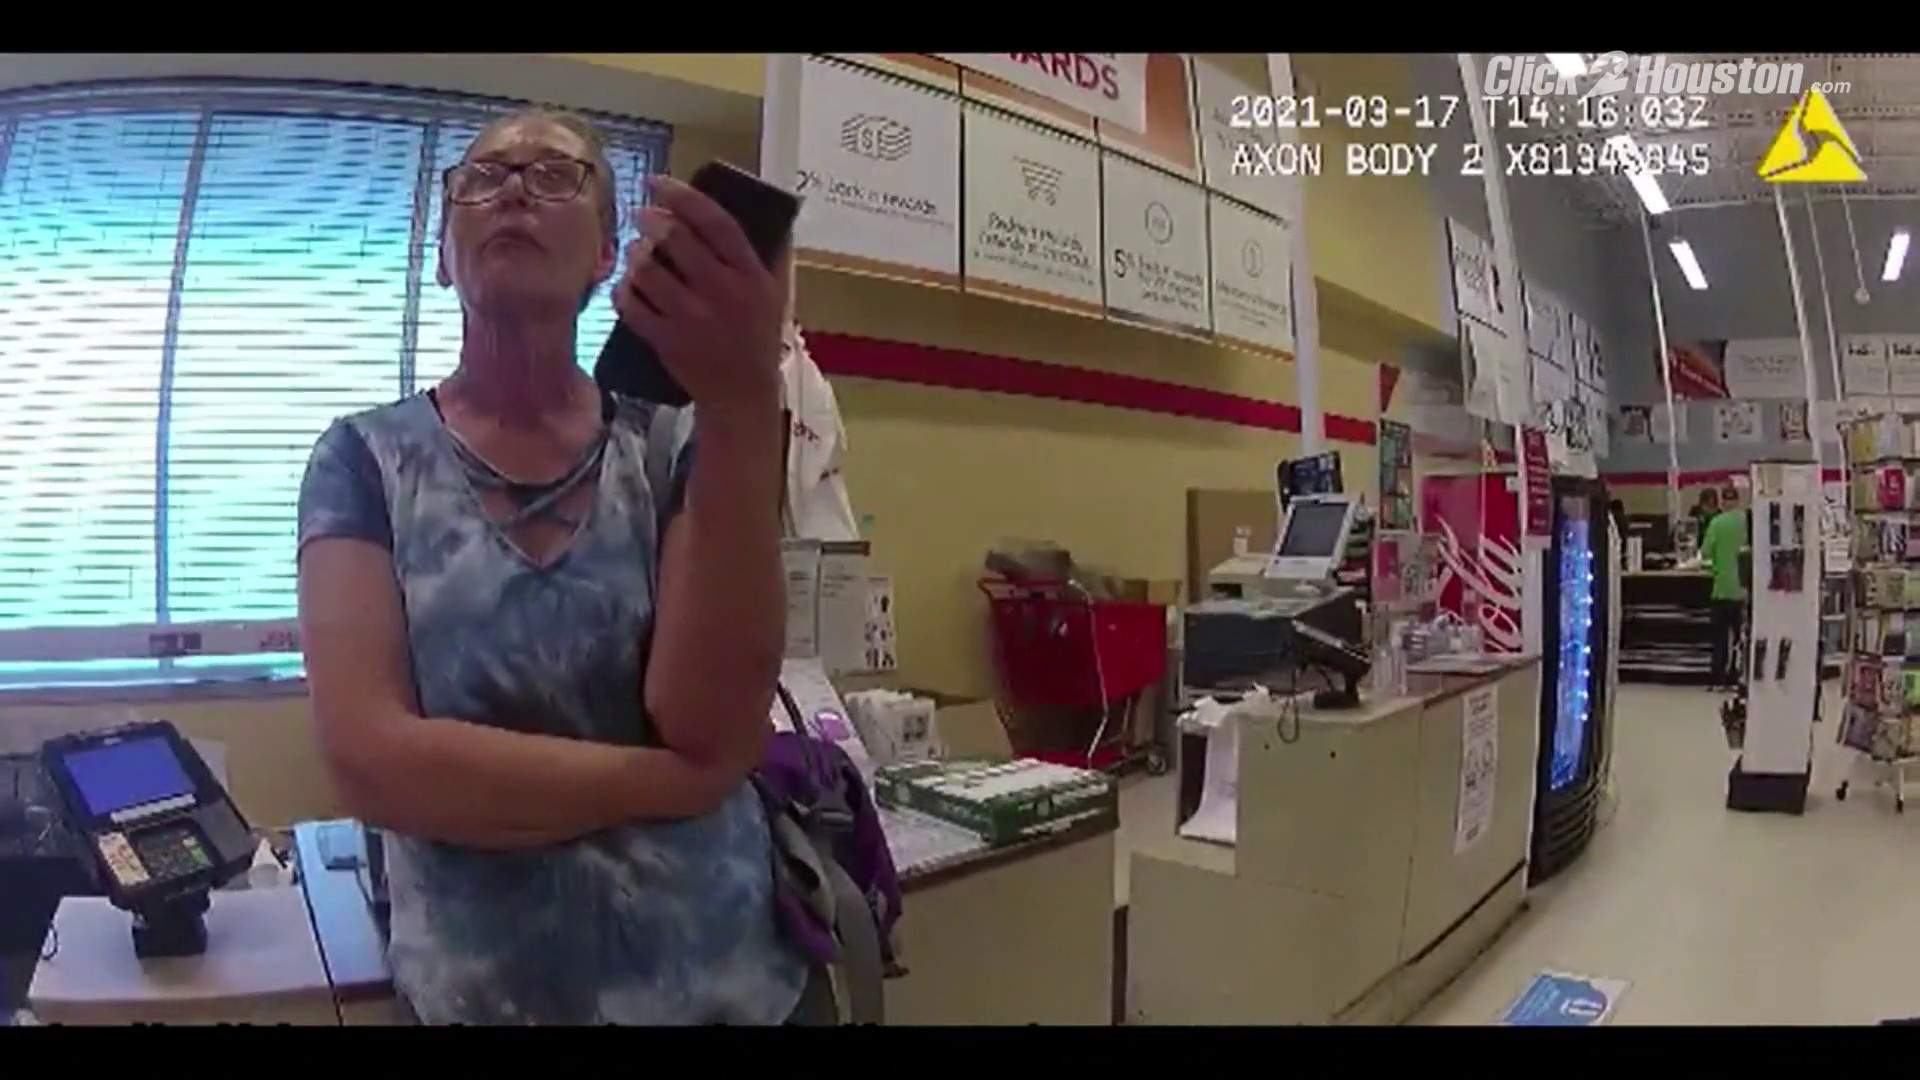 Camera footage shows the second arrest of a woman without a mask, this time at the Texas City store